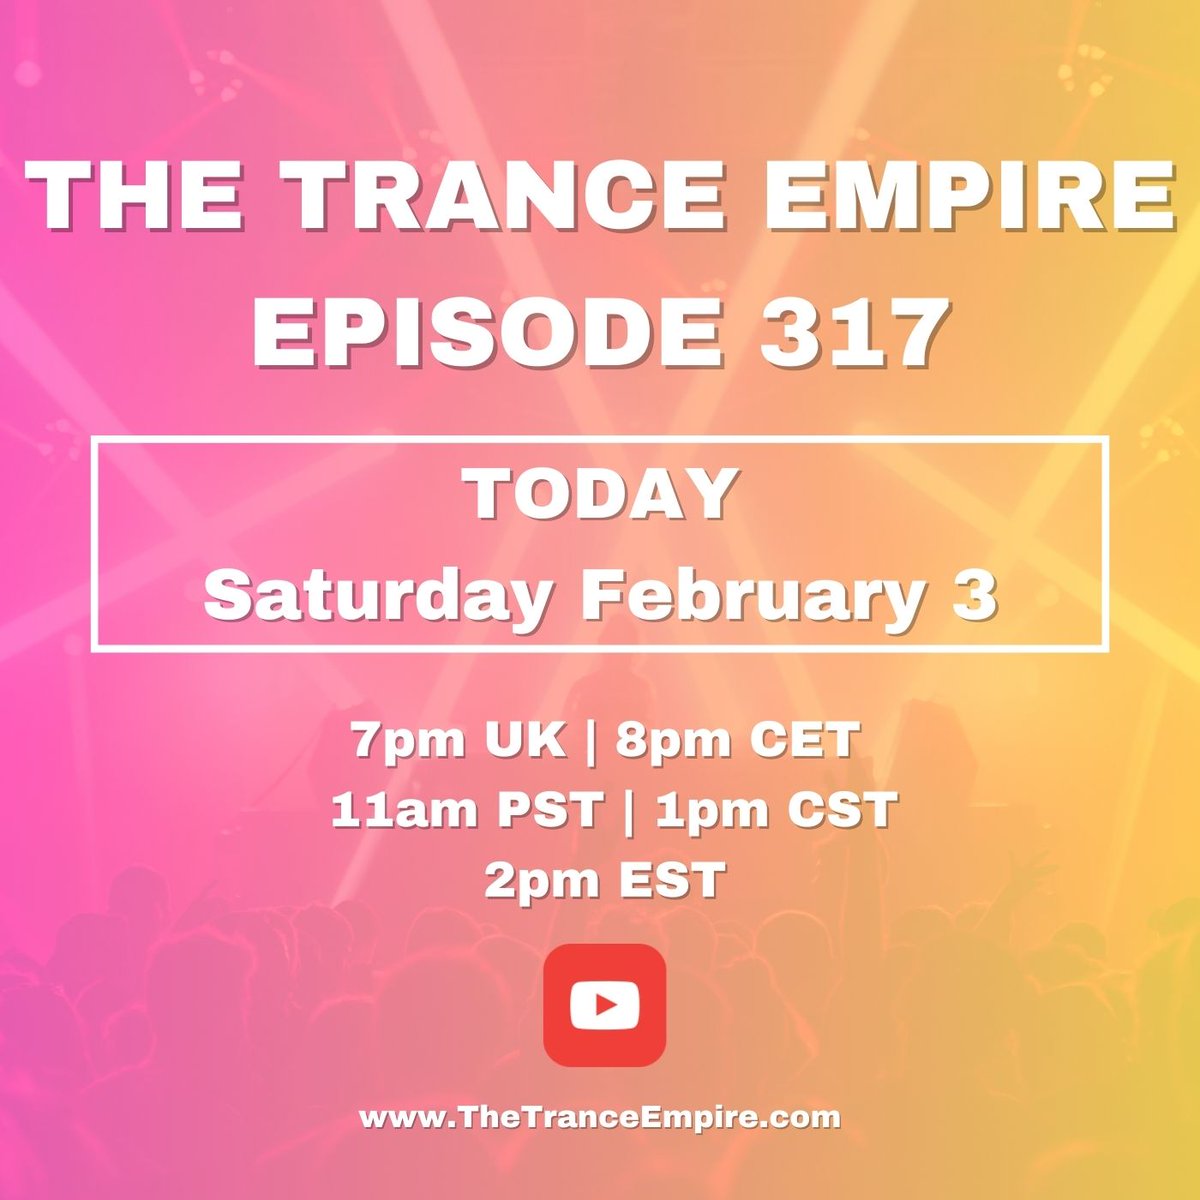 A huge two hours of Trance music awaits you on episode 317 of The Trance Empire today 🙌 Join us on YouTube for the premiere with @RodmanOfficial and chat with us live 🔥

Watch👉 lnk.to/TTE317

#Trance #Trancefamily #Trancemusic